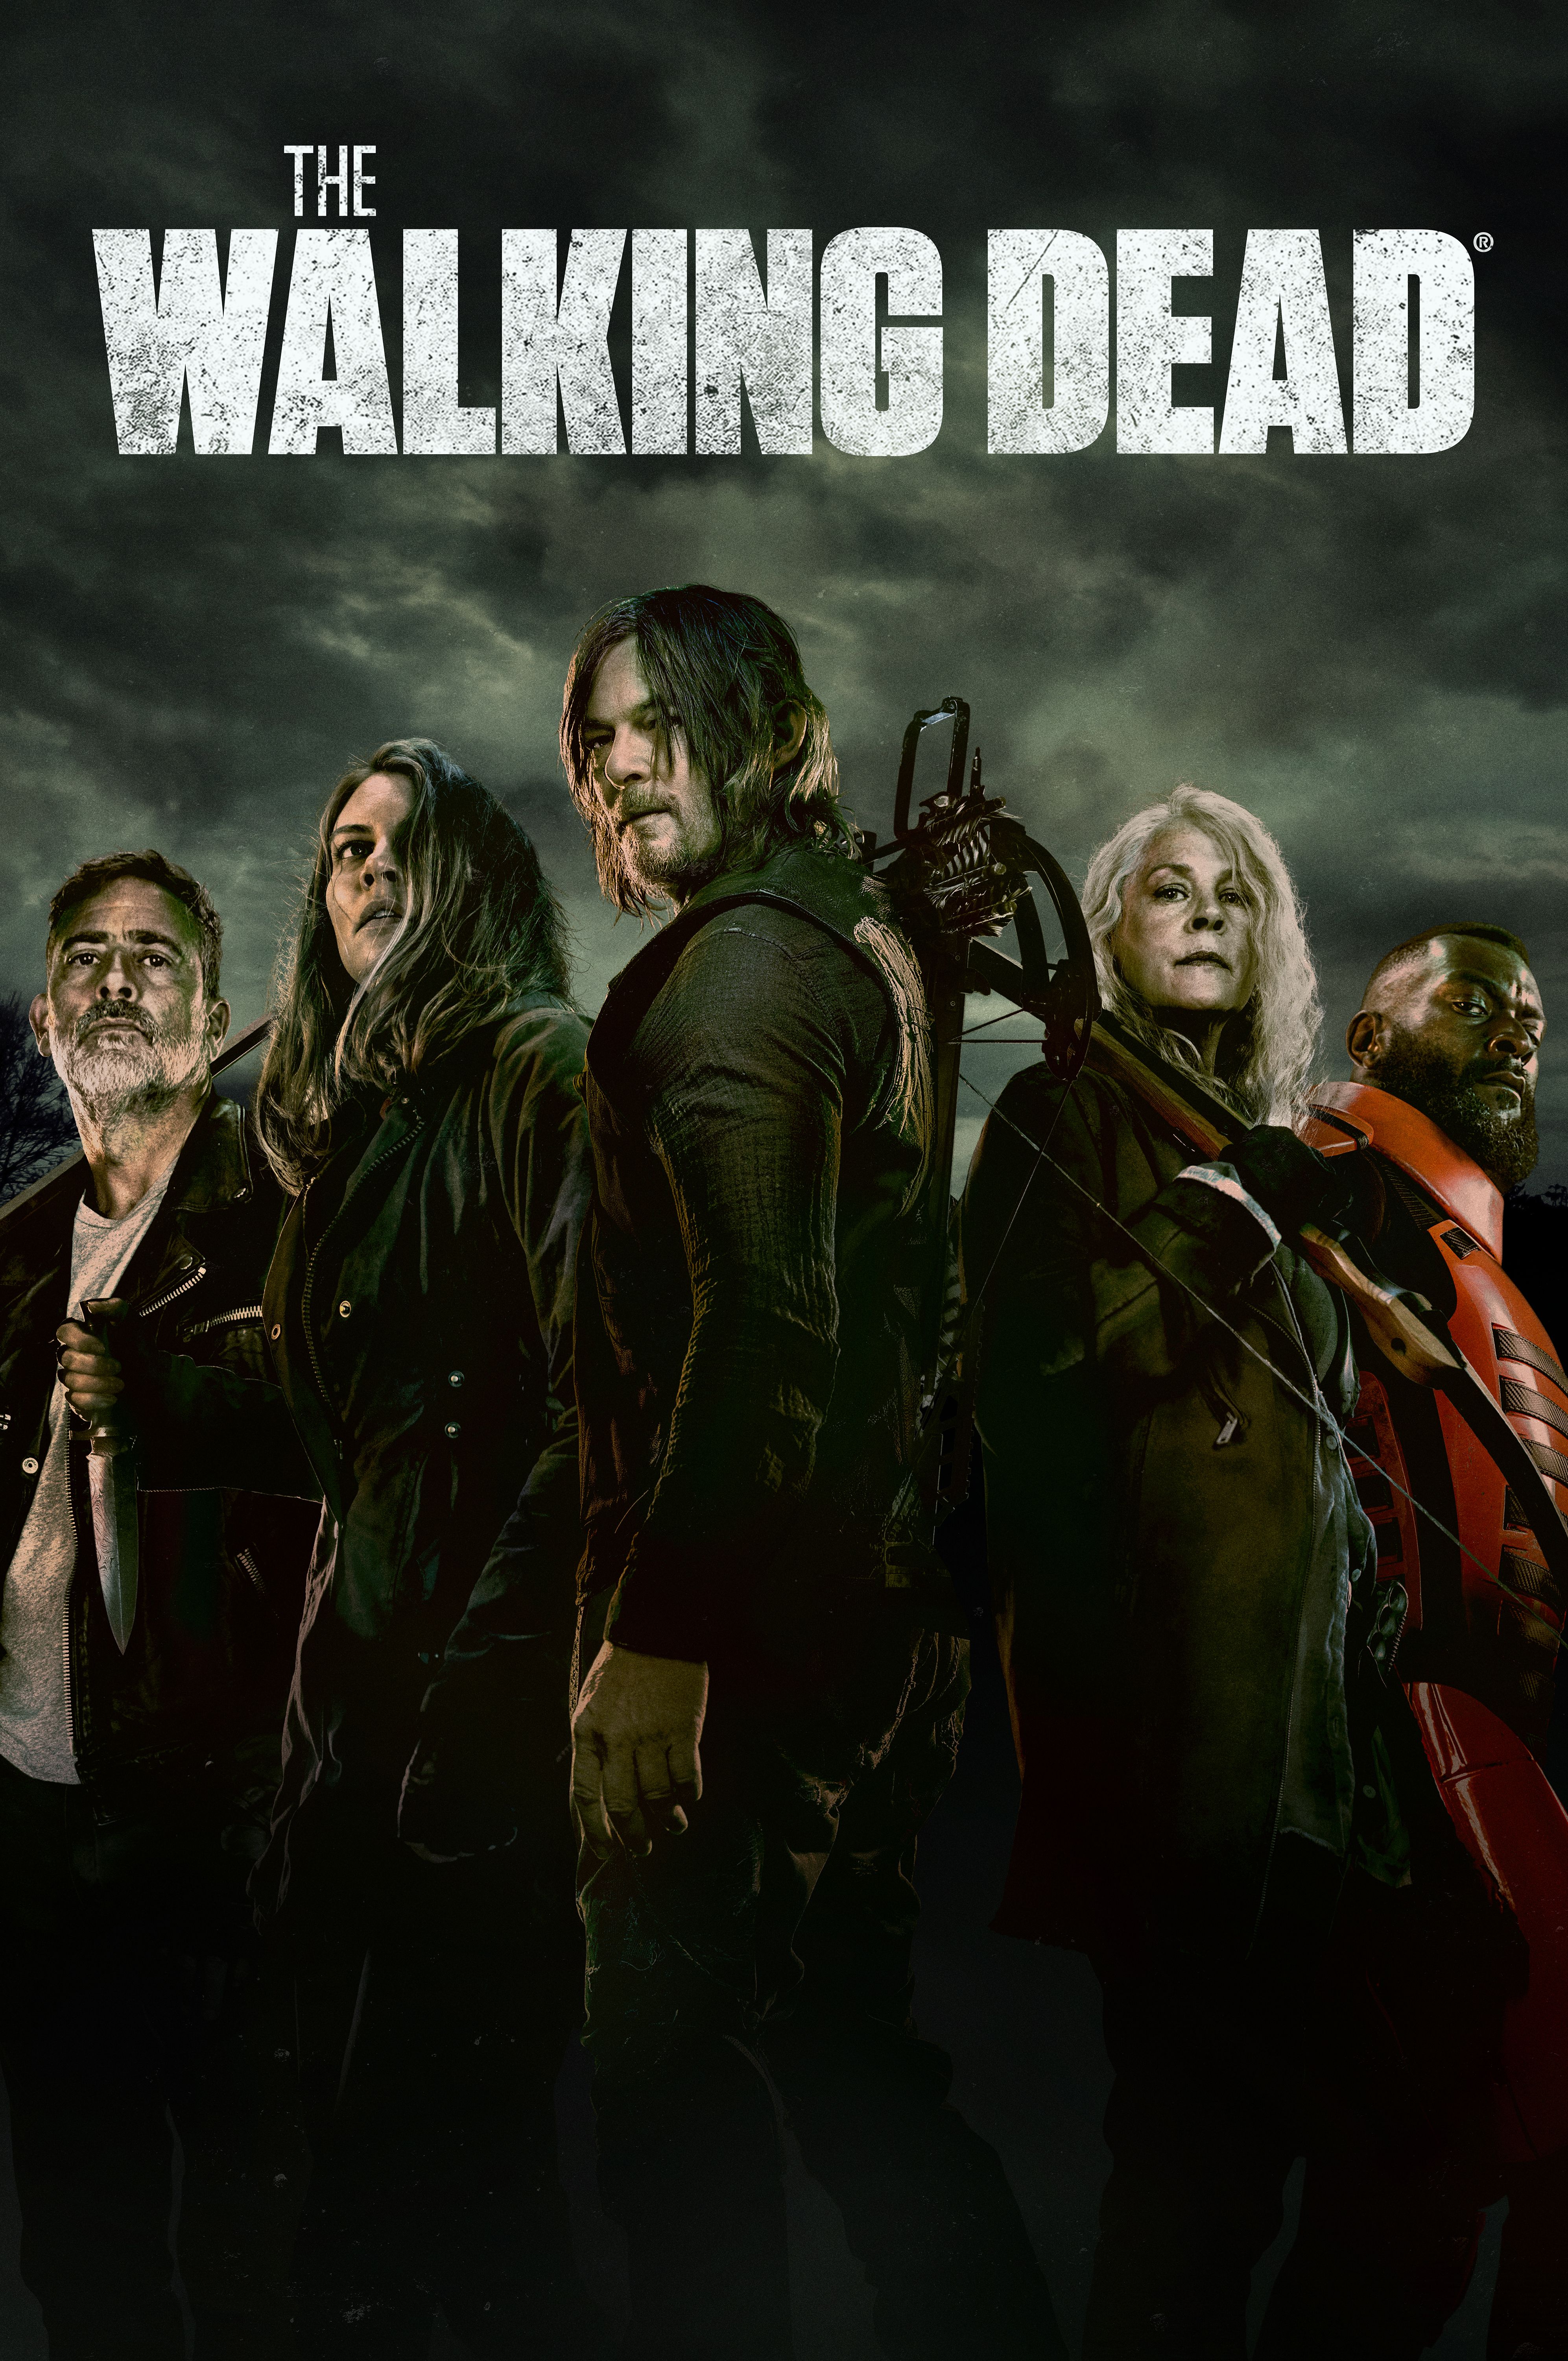 The Walking Dead World on X: Season 10 NYCC poster for #TheWalkingDead,  featuring Daryl, Carol, and Michonne!  / X